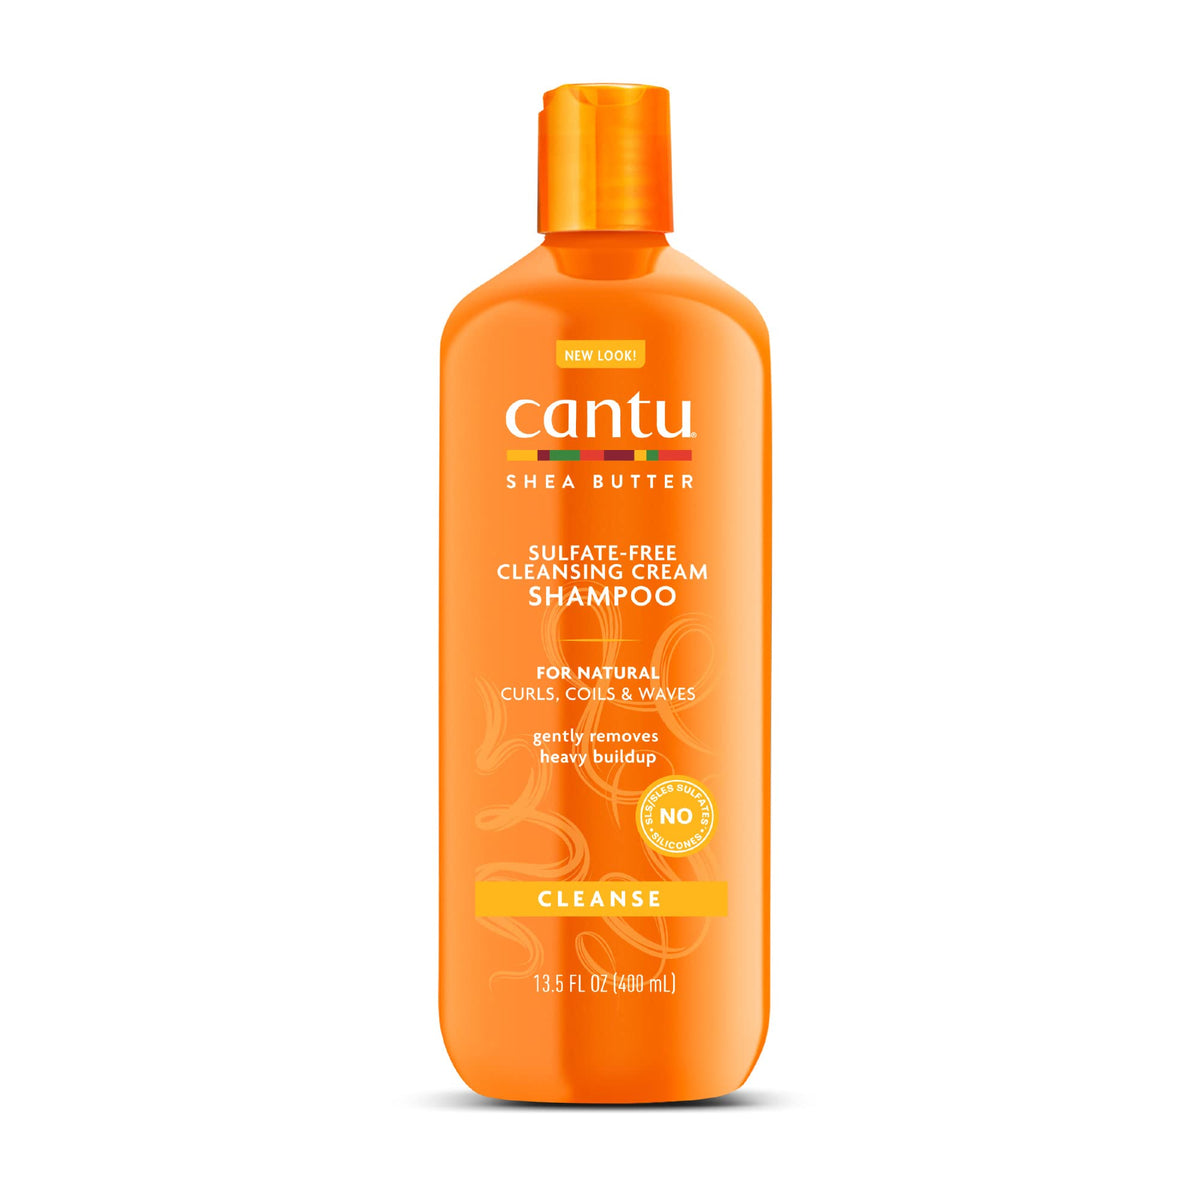 Cantu Sulfate-Free Cleansing Cream Shampoo with Shea Butter for Natural Hair - 400ml